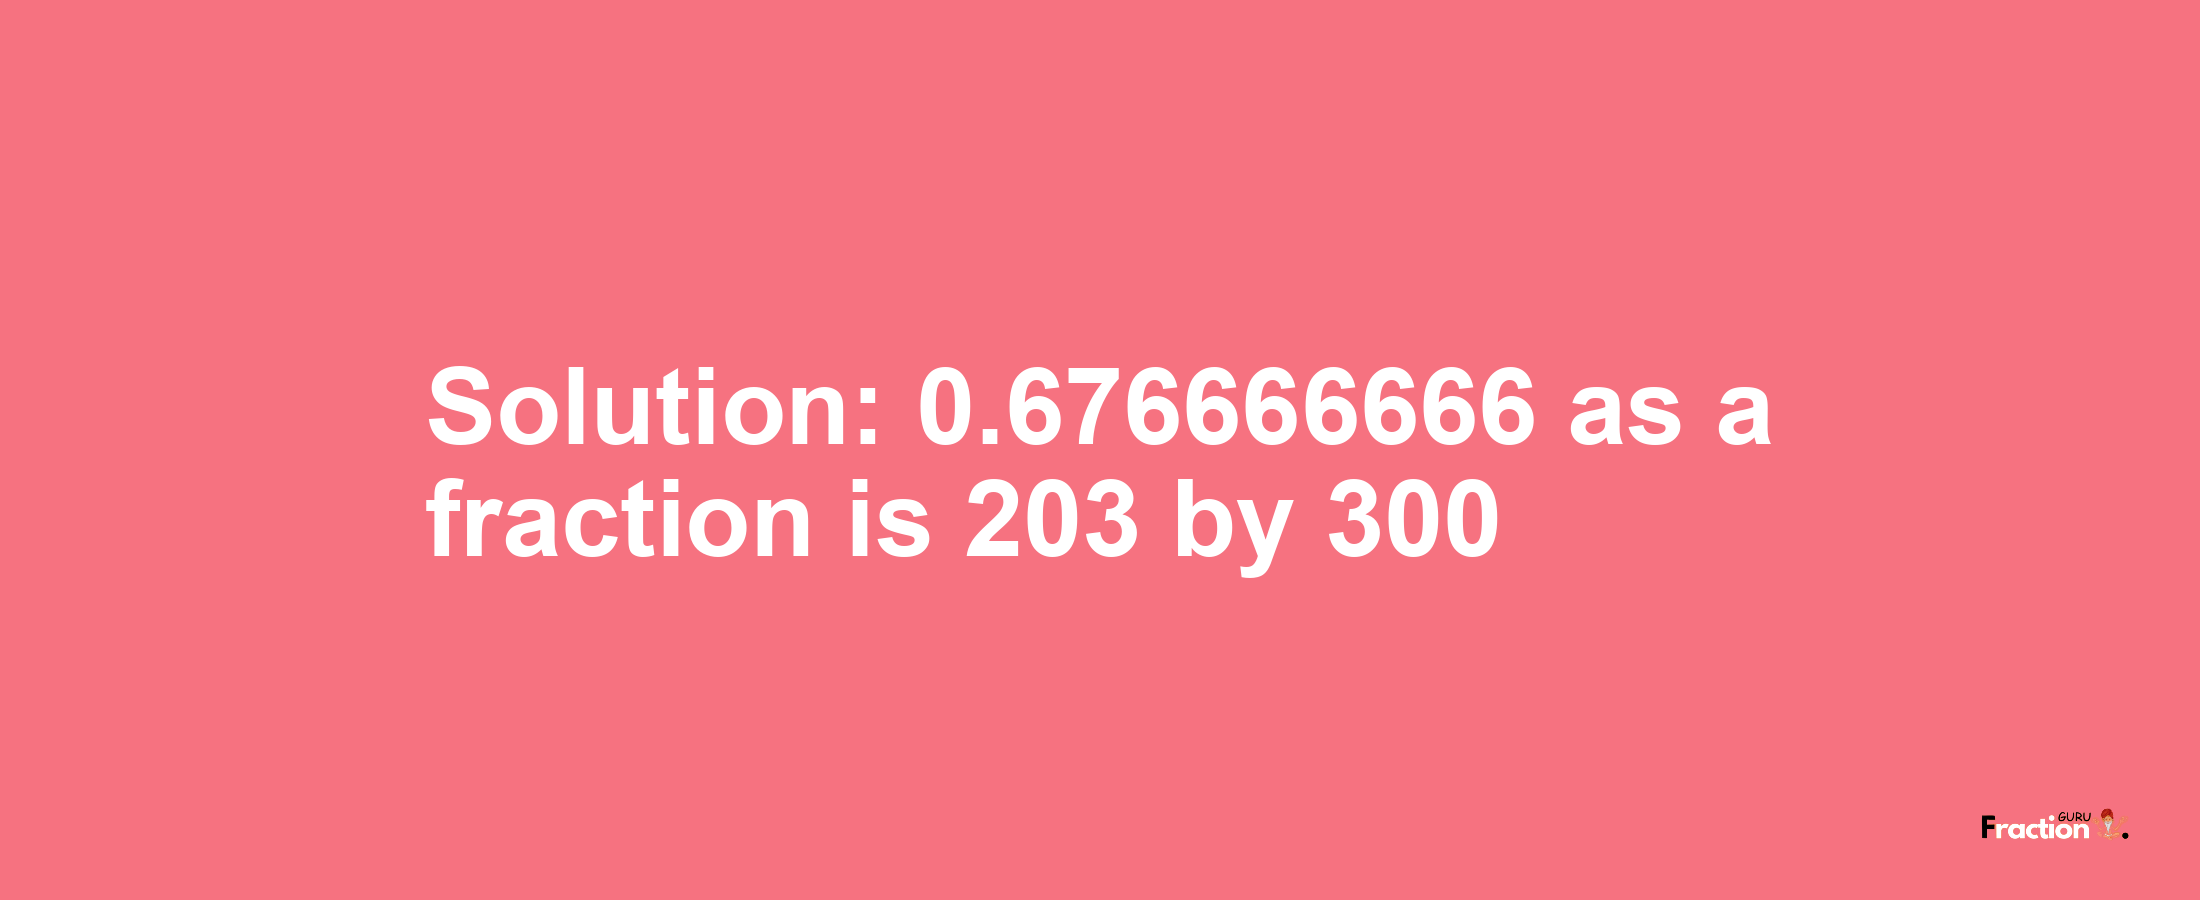 Solution:0.676666666 as a fraction is 203/300